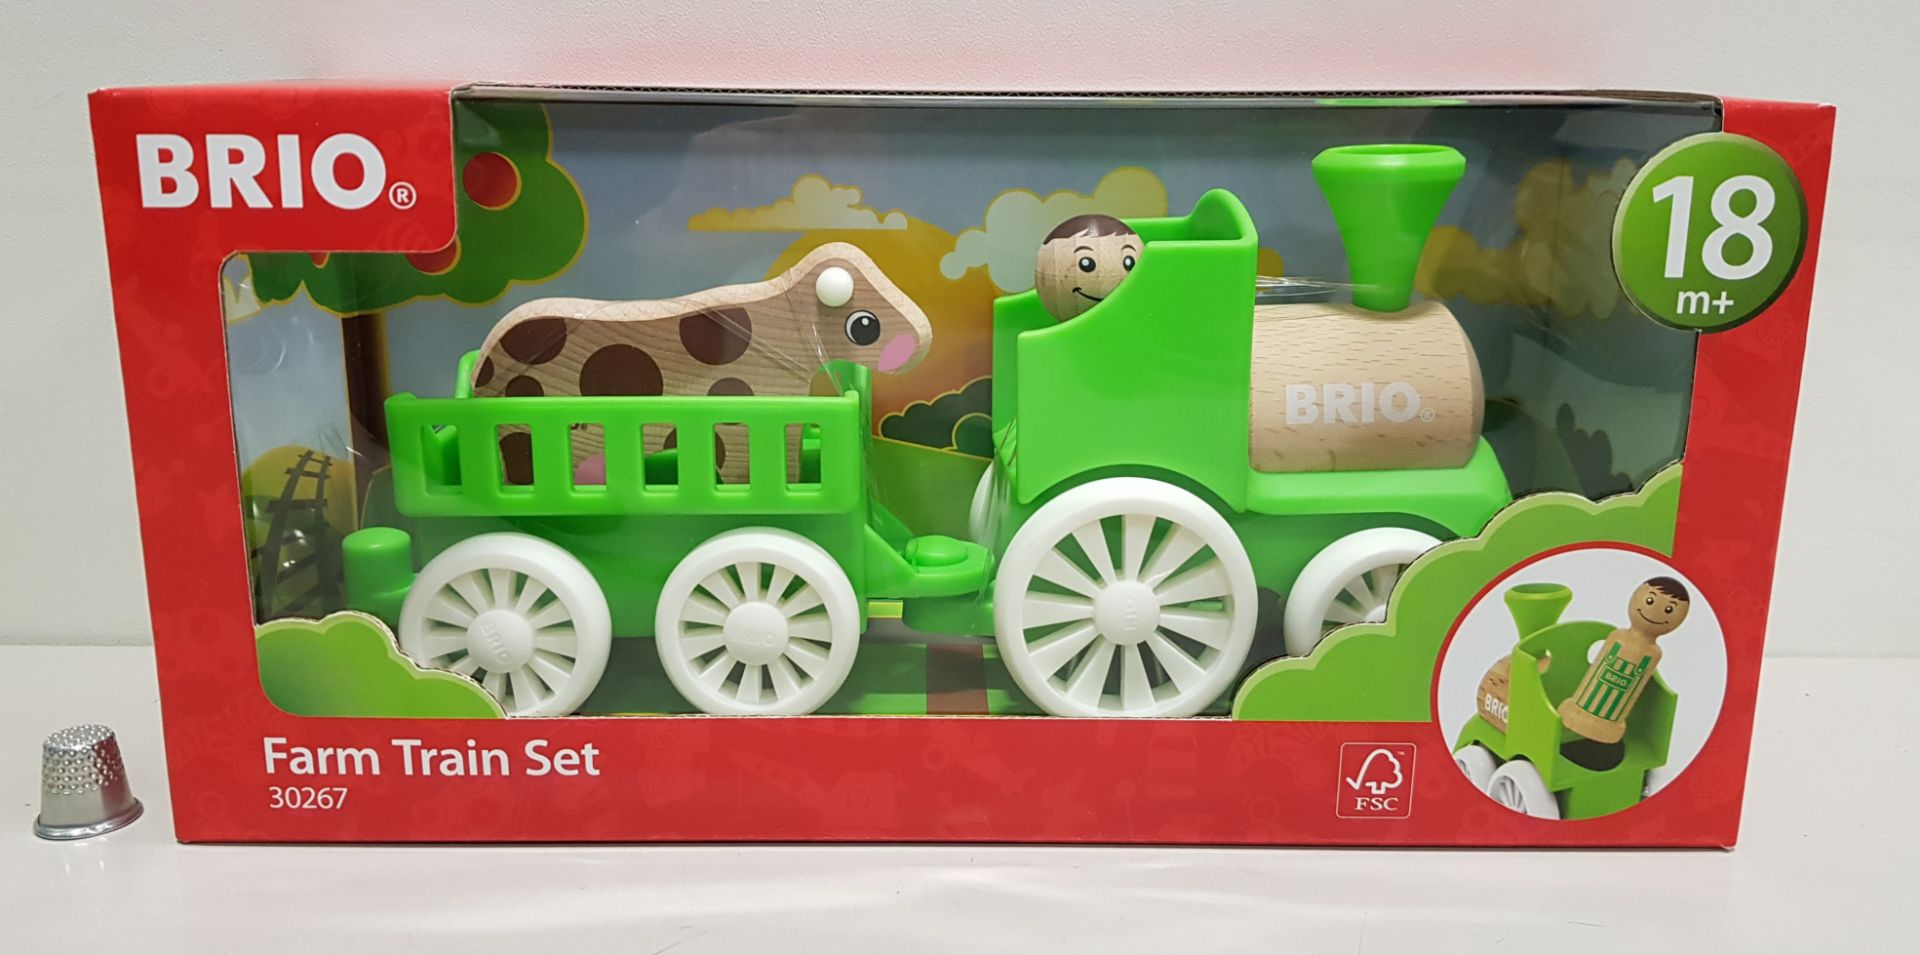 12 X BRAND NEW BRIO MY HOME TOWN TRAIN SET - IN 2 OUTER CARTONS